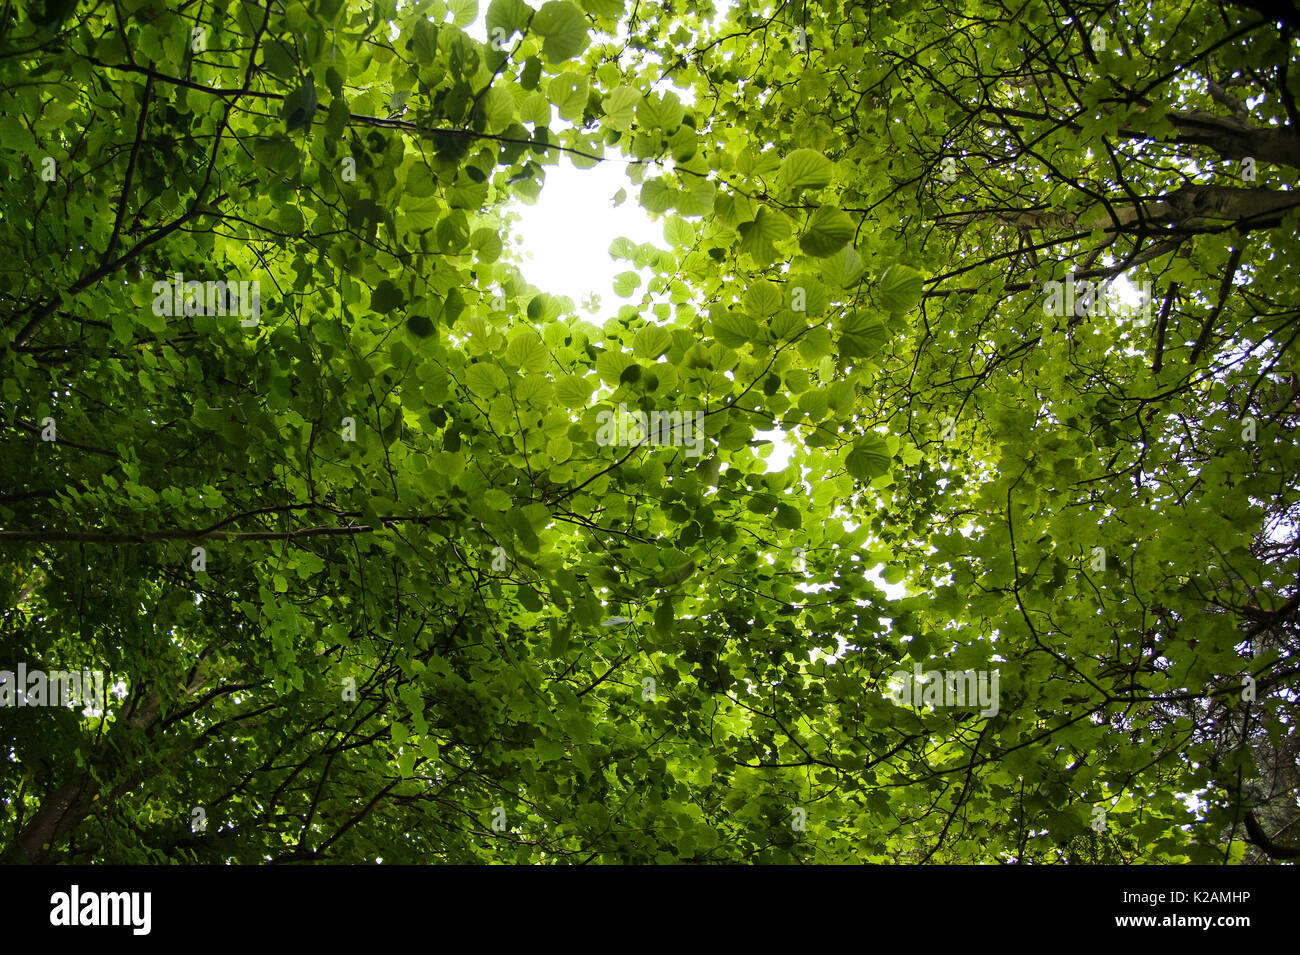 Trippy Nature High Resolution Stock Photography and Images - Alamy